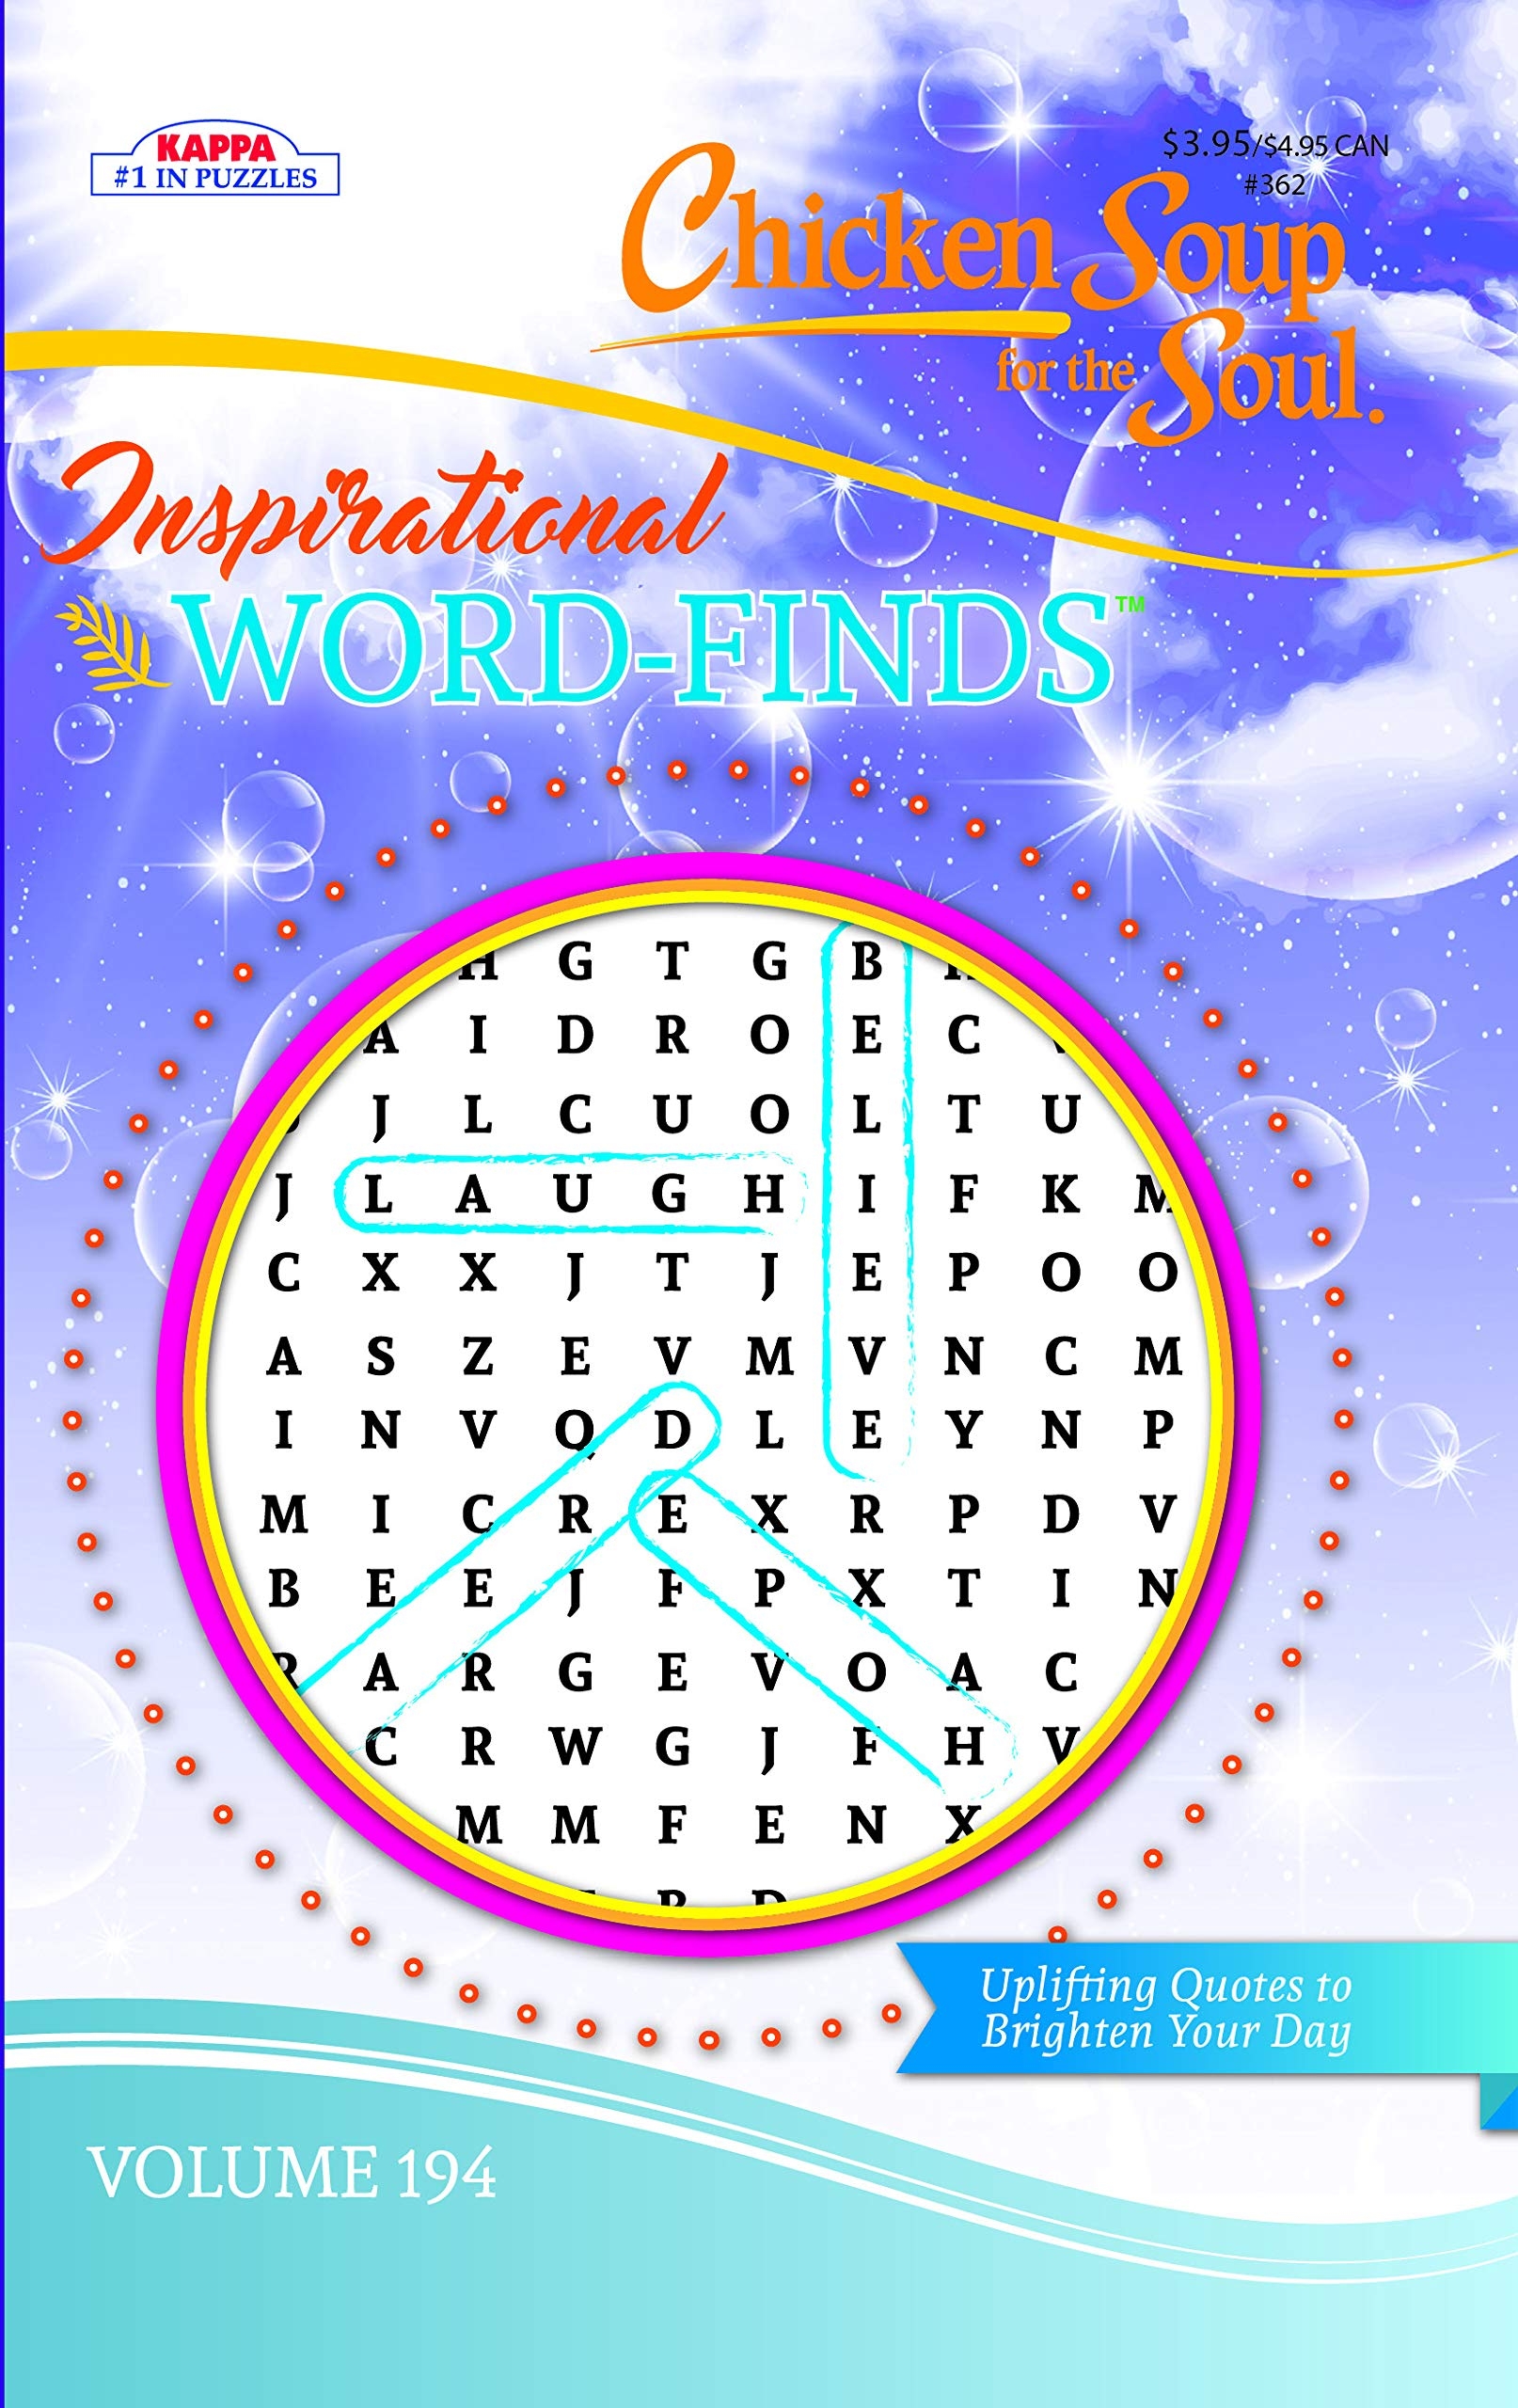 Chicken Soup For The Soul Word Find Puzzle Book Word Search Volume 194 9781559930222 Books Amazon ca